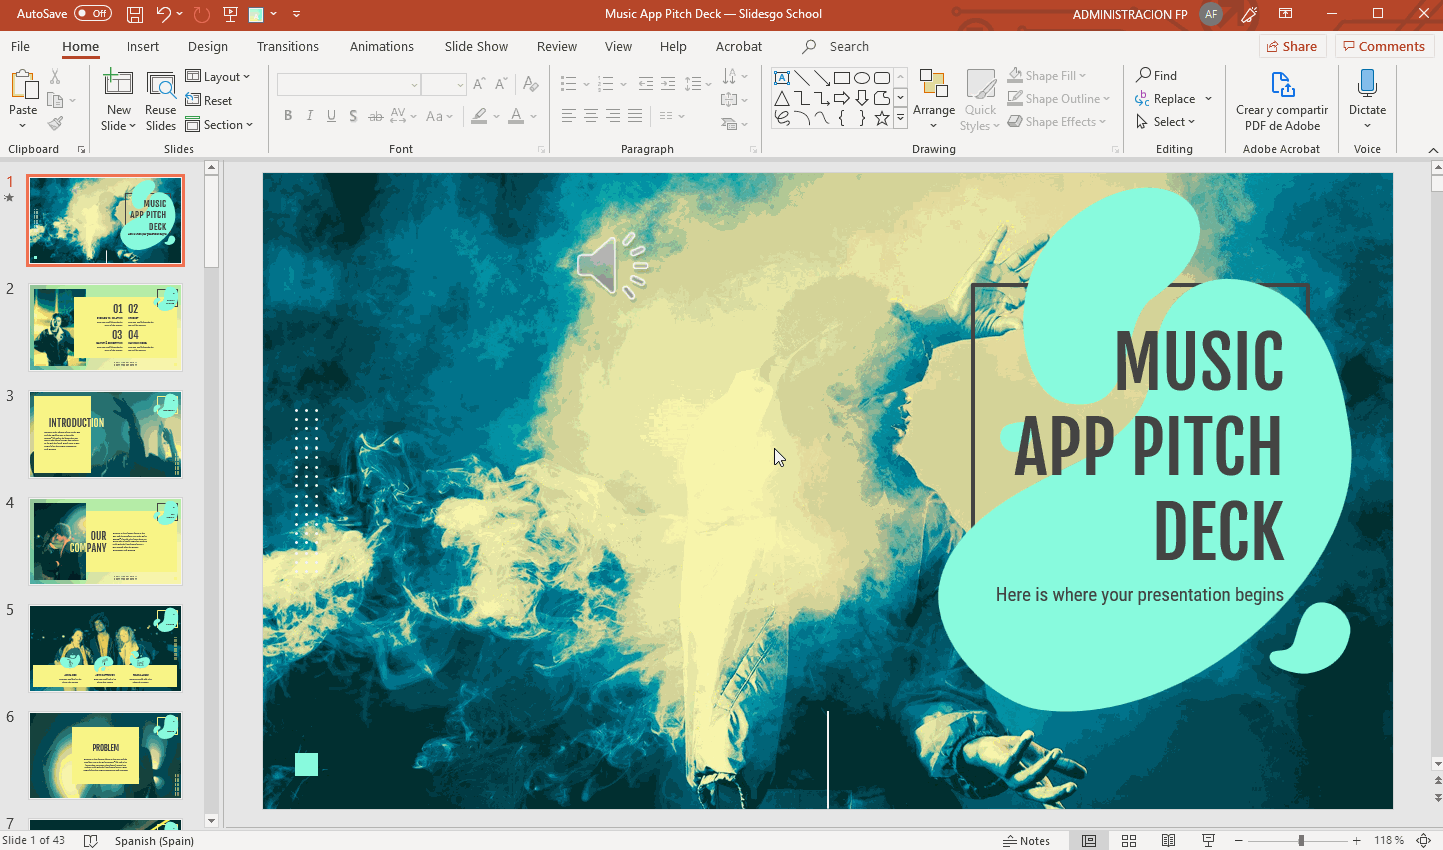 How to Add, Record or Edit Audio or Music in PowerPoint -5